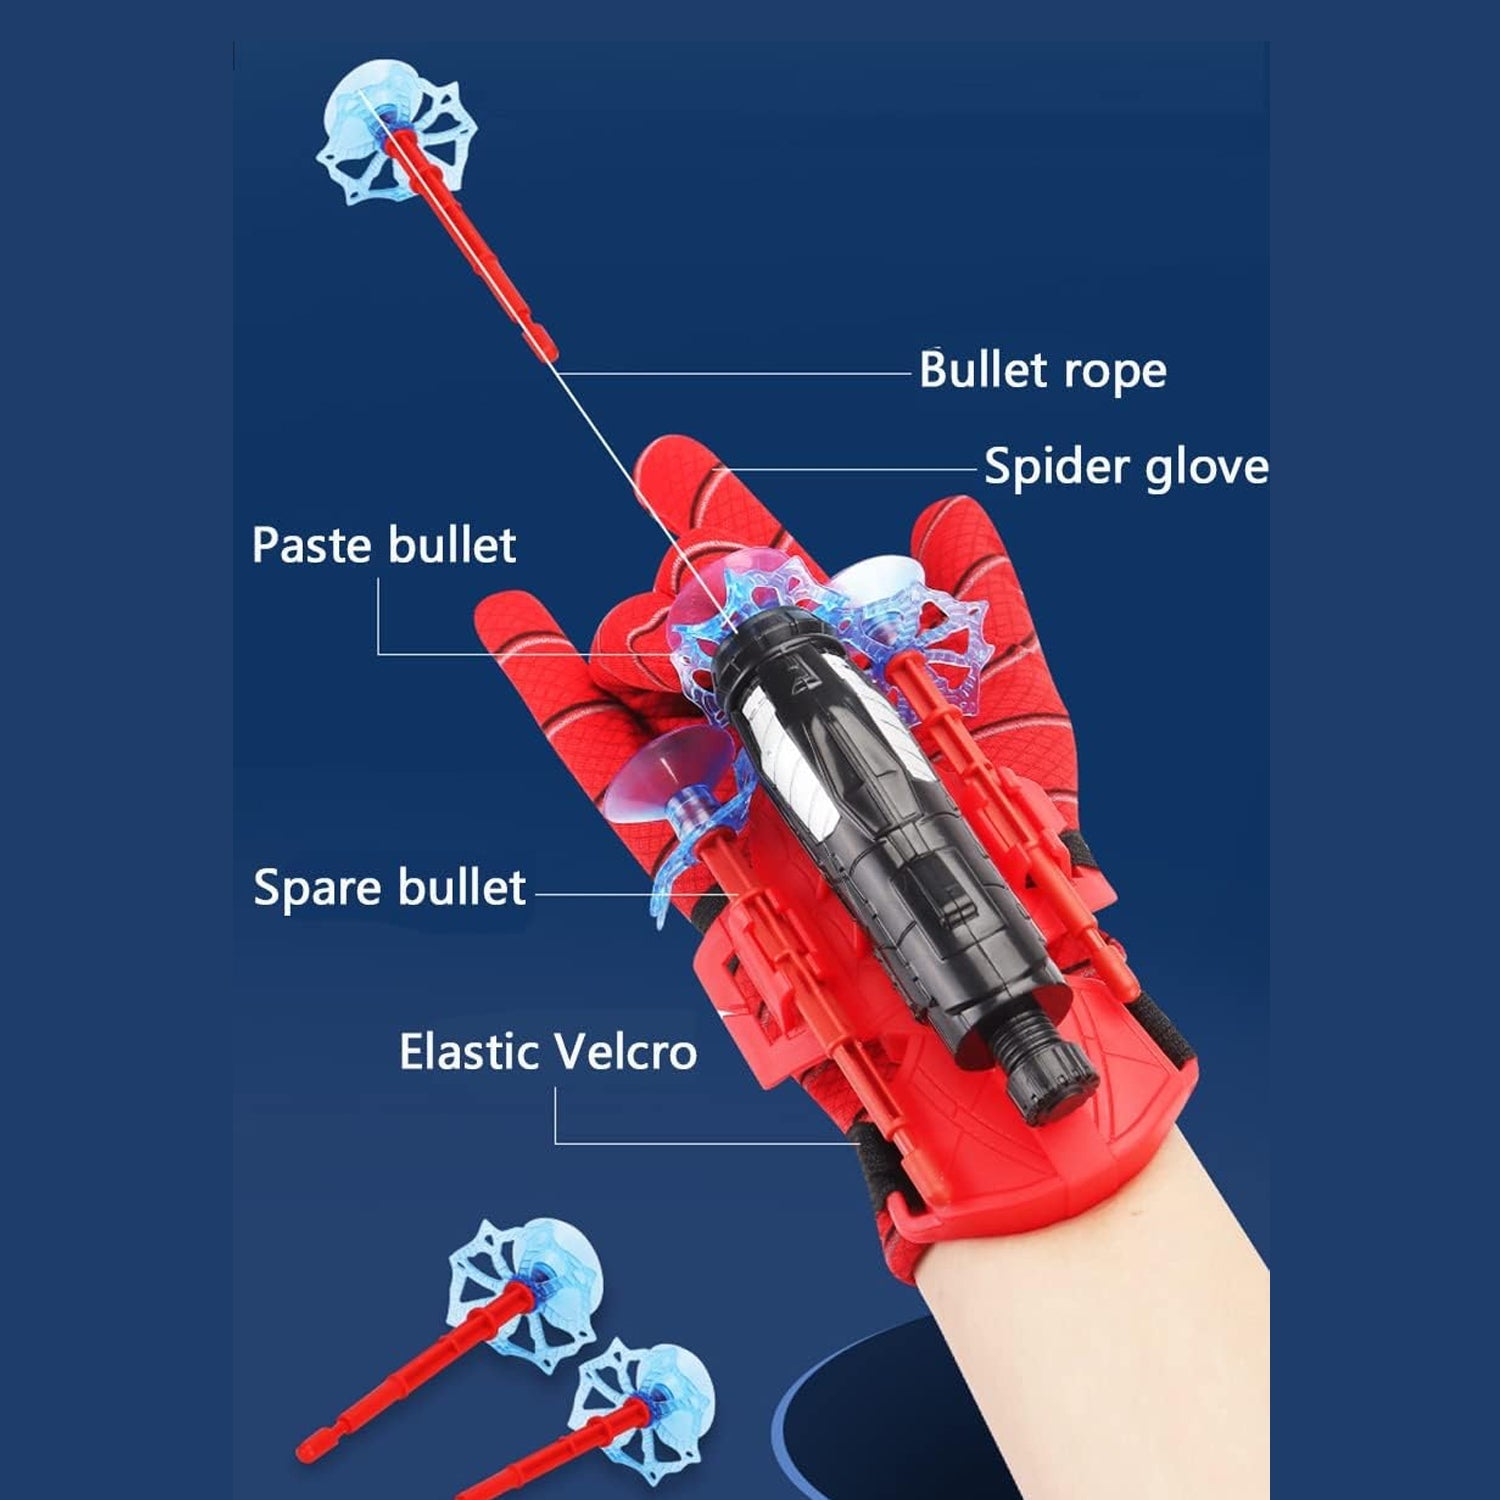 17601 Web Shooter Toy for Kids Fans, Launcher Wrist Gloves Toys For Kids, Boys Superhero Gloves Role-Play Toy Cosplay, Sticky Wall Soft Bomb Funny Children's Educational Toys